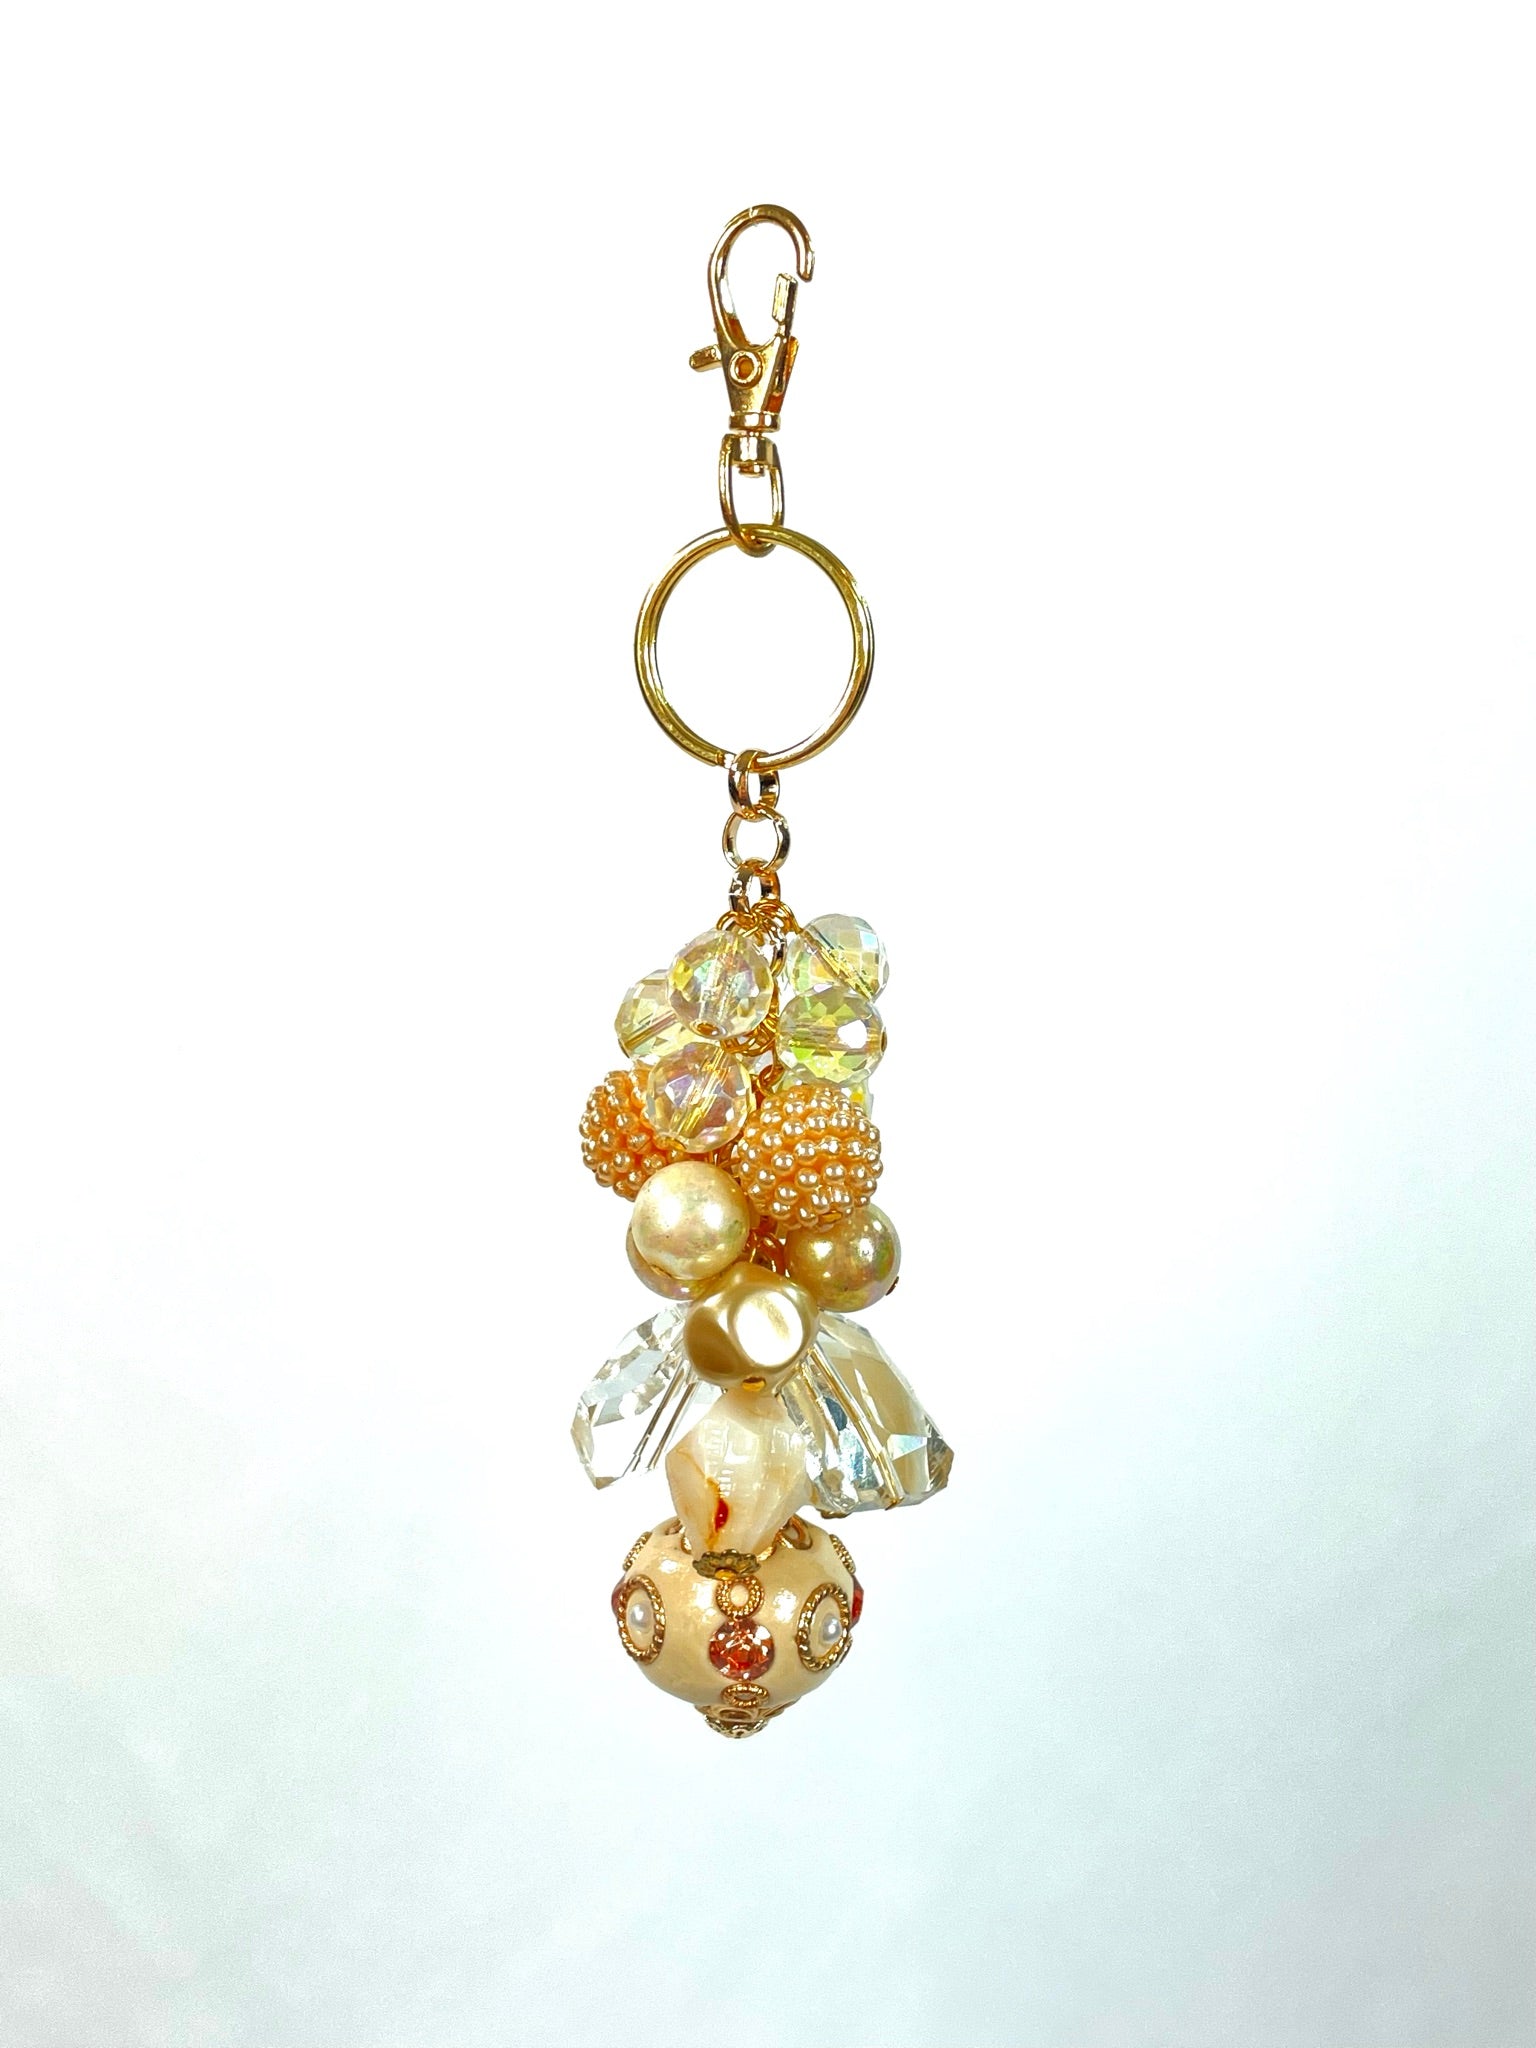 Ivory Crystal Keychain Purse Bling